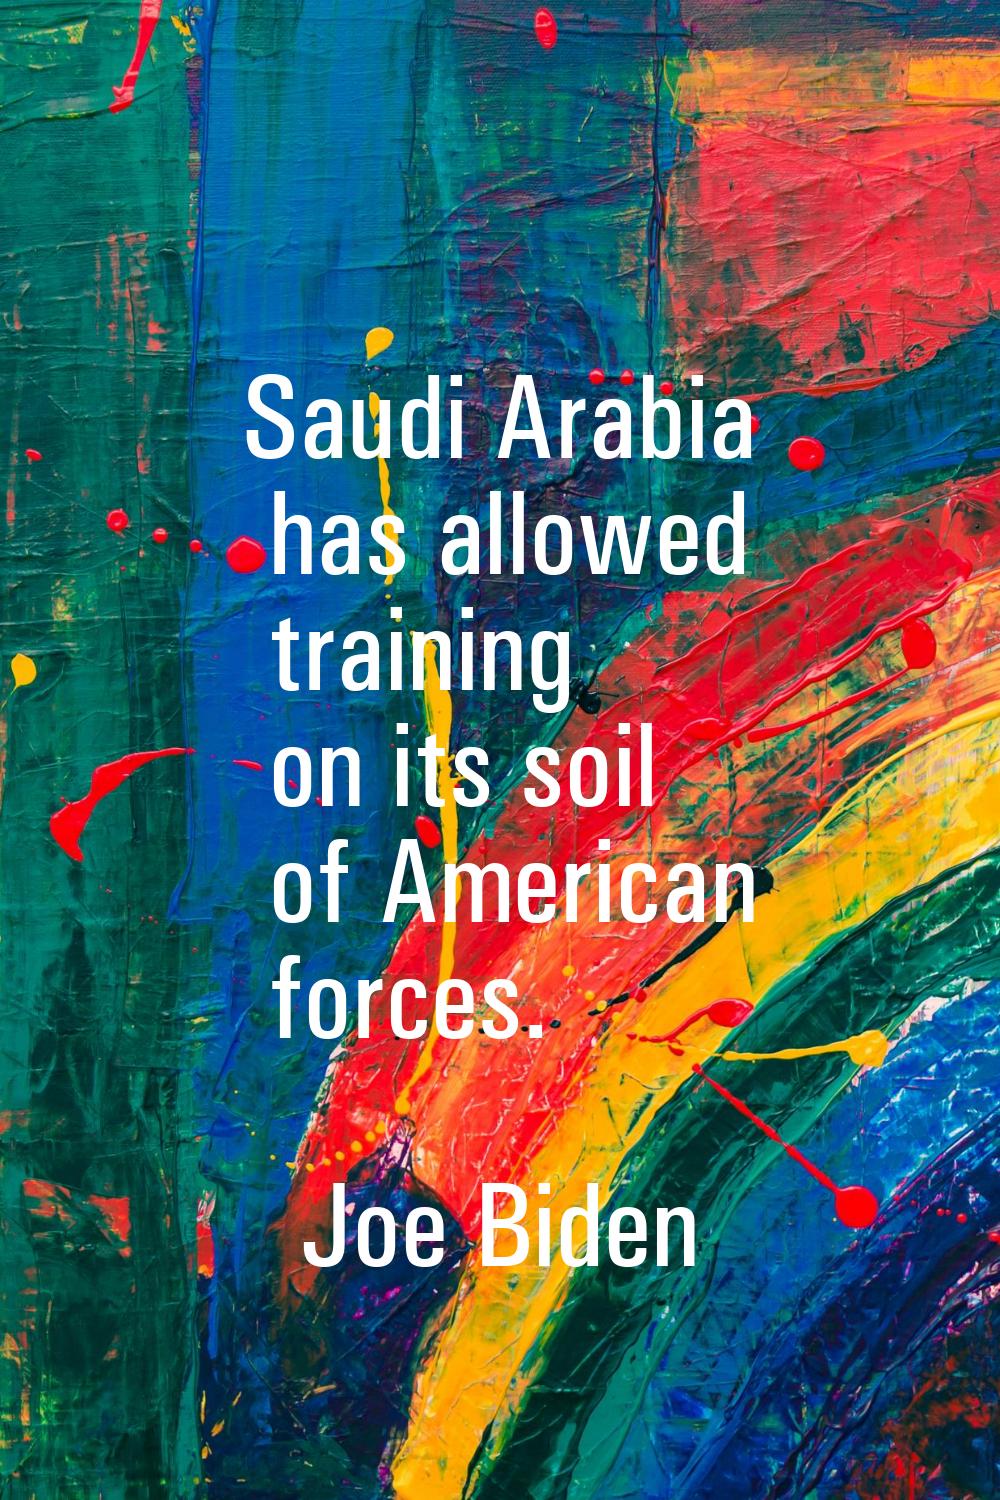 Saudi Arabia has allowed training on its soil of American forces.